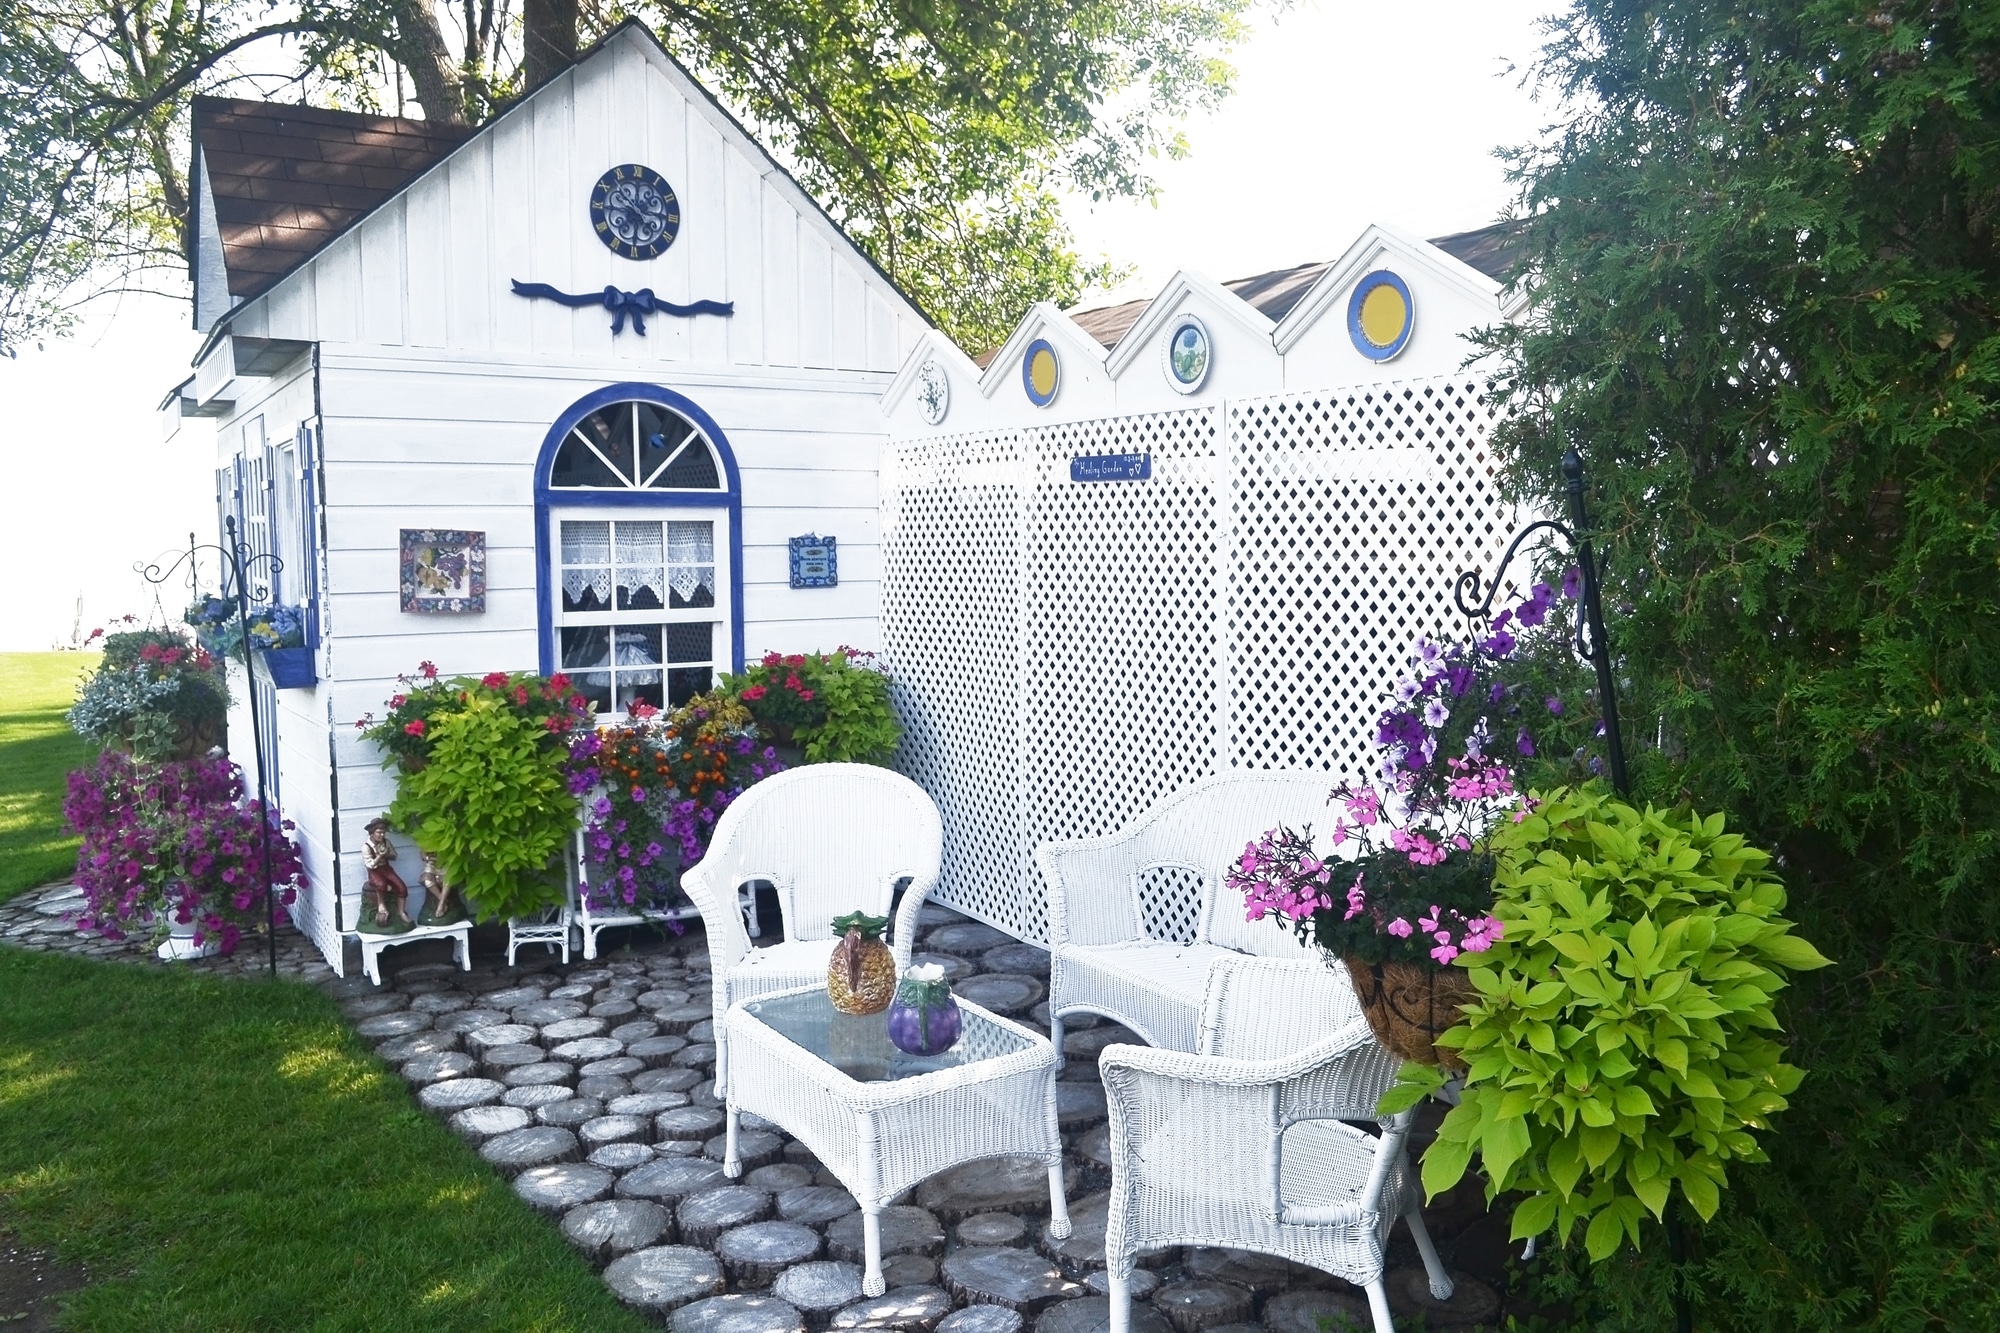 A beautiful small shed with nice chairs and a lot of flowers in the backyard, painted new in white.